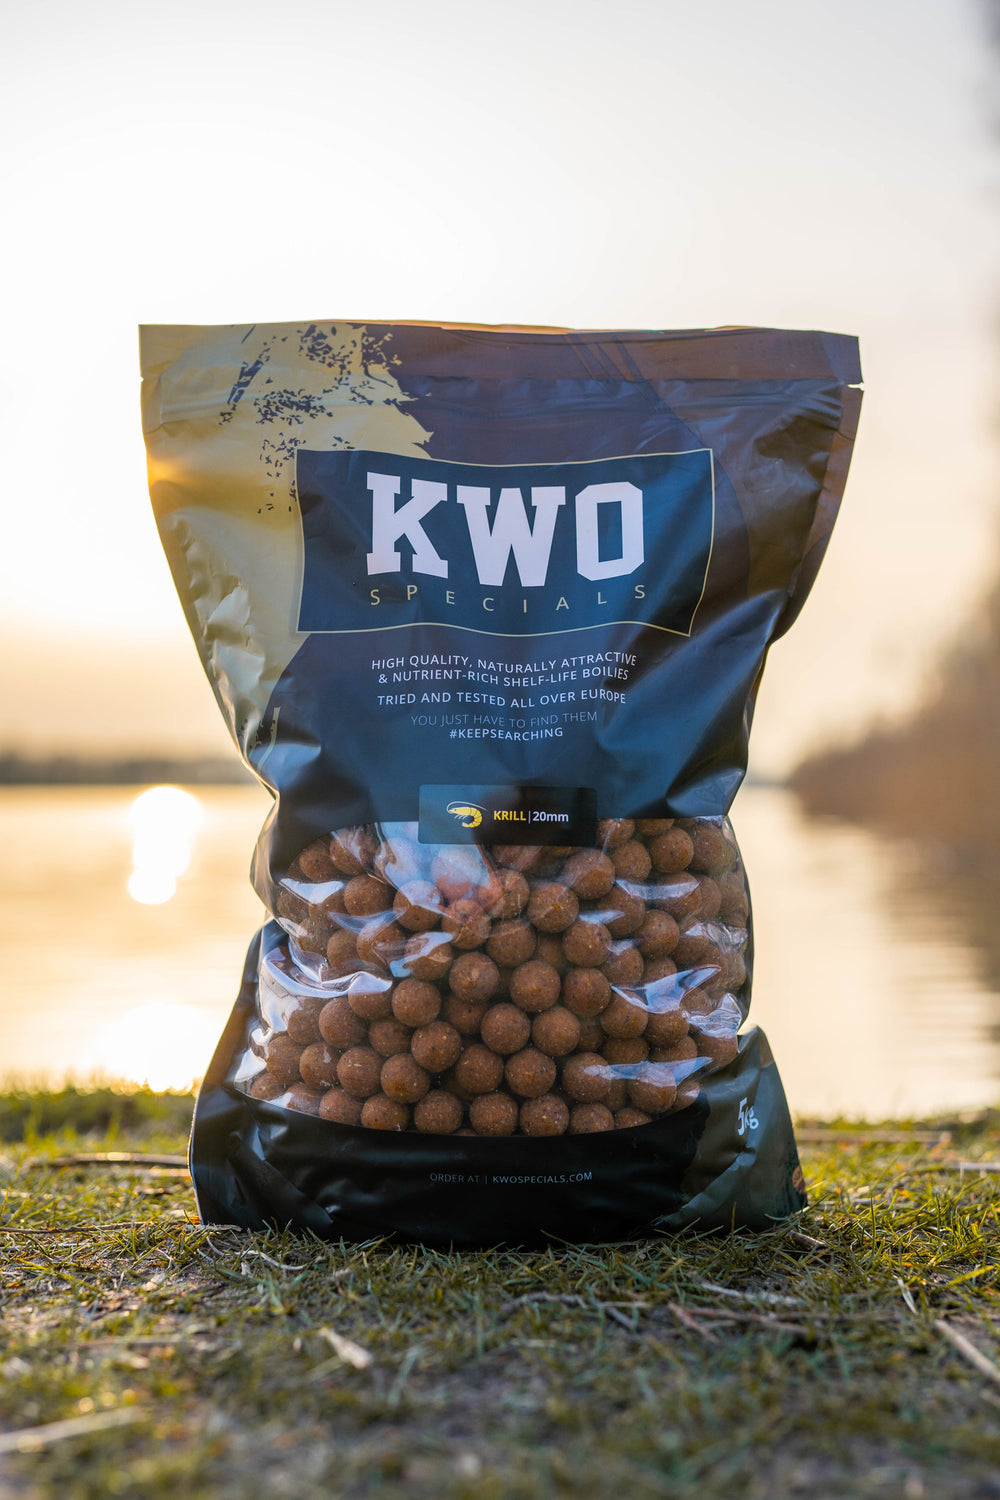 KWO Krill Specials 5KG - Boilies - KWO Shop